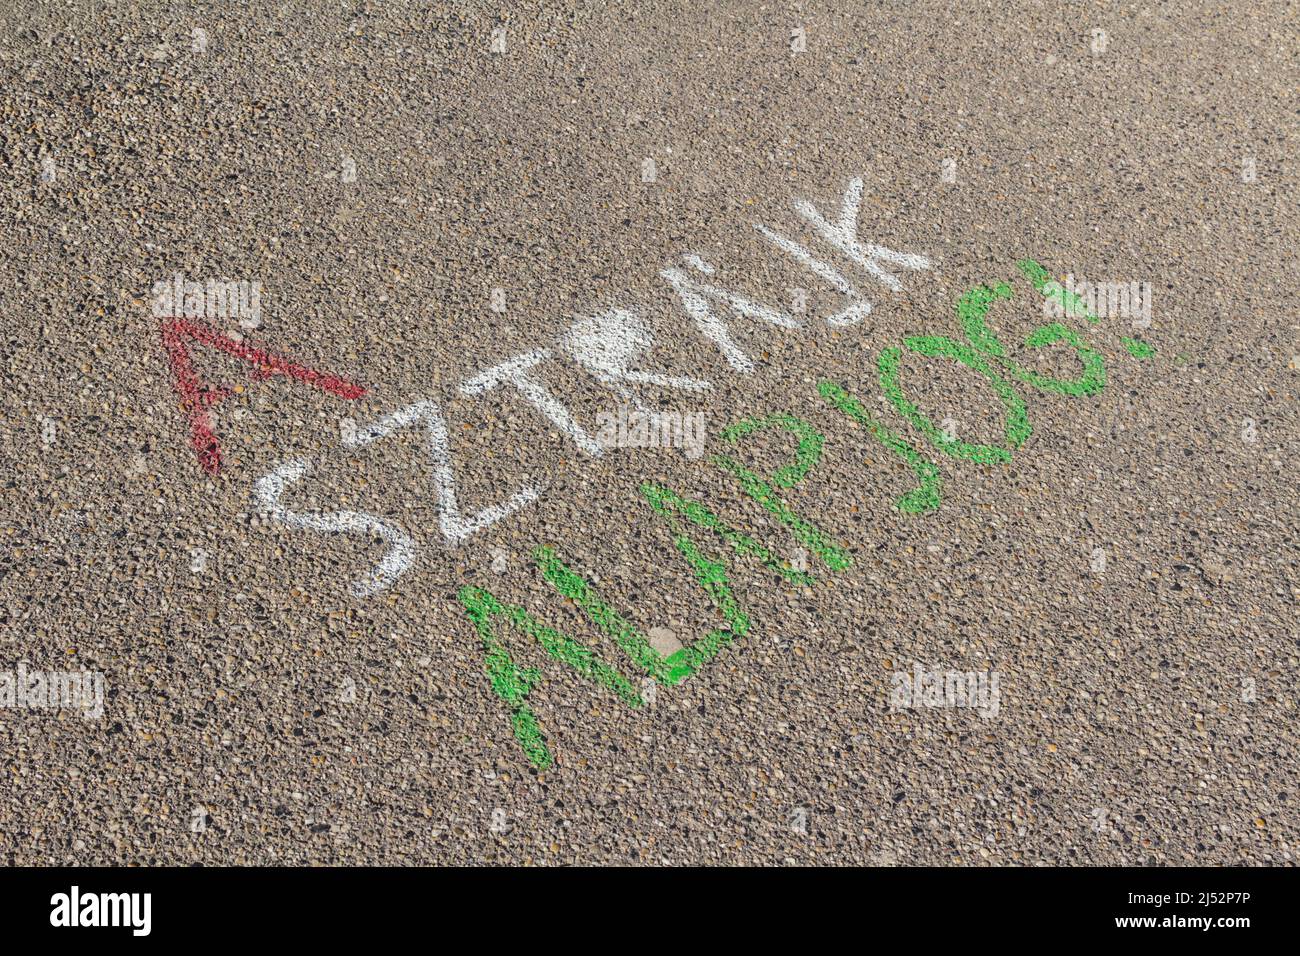 'A sztrajk alapjog' (Strike is fundamental right) painted on sidewalk in tricolour of Hungary Stock Photo